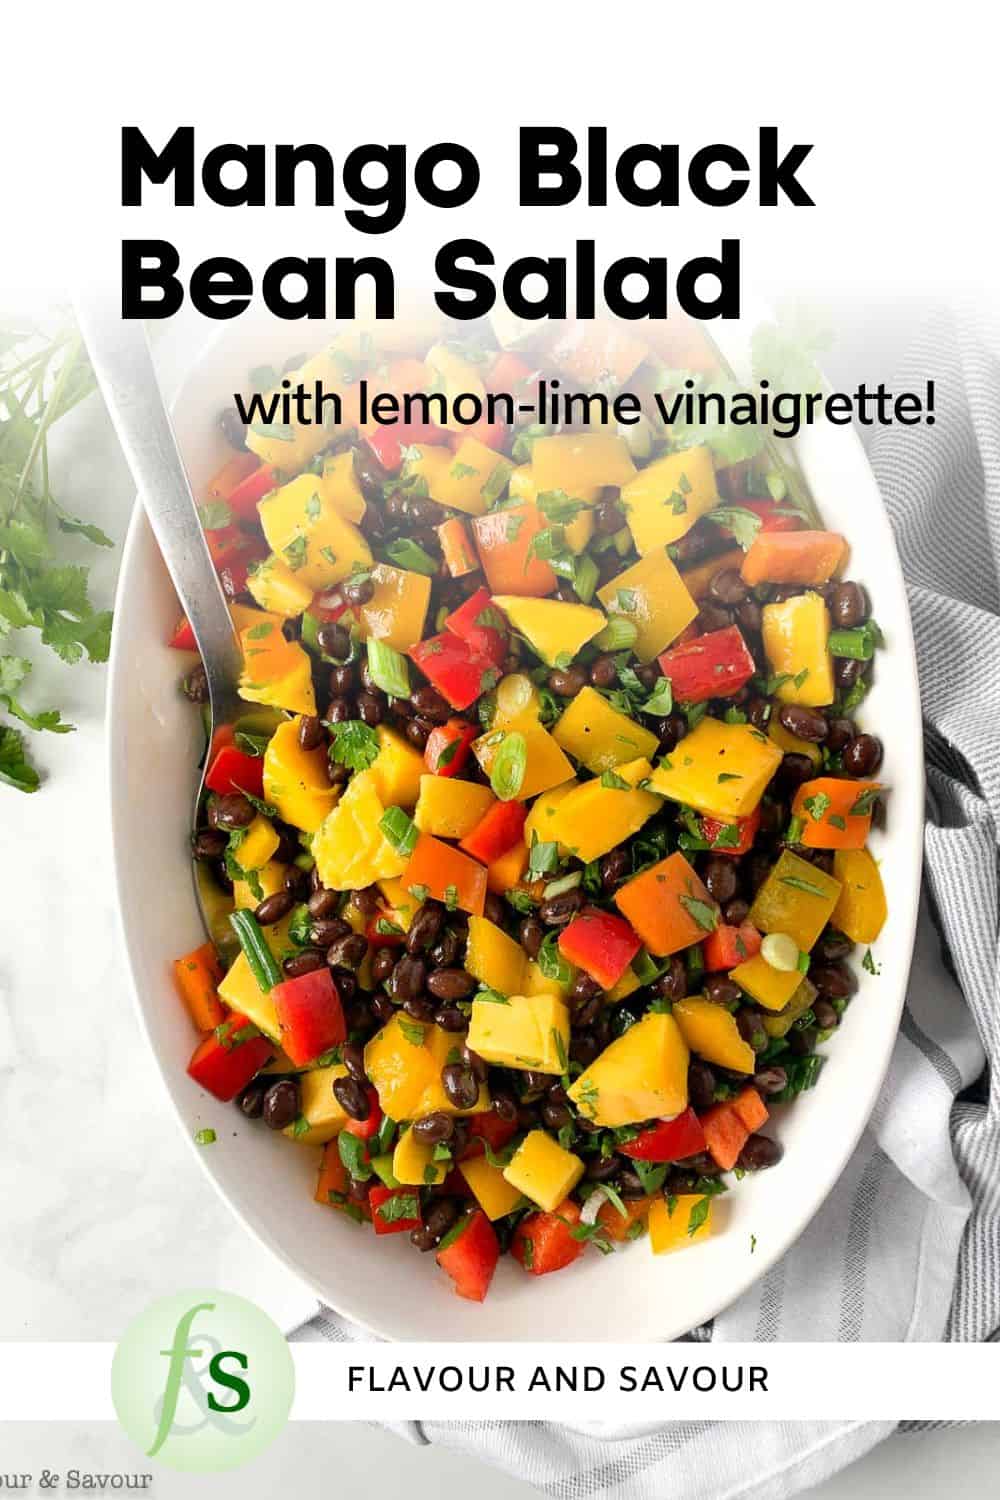 Image with text for mango black bean salad.